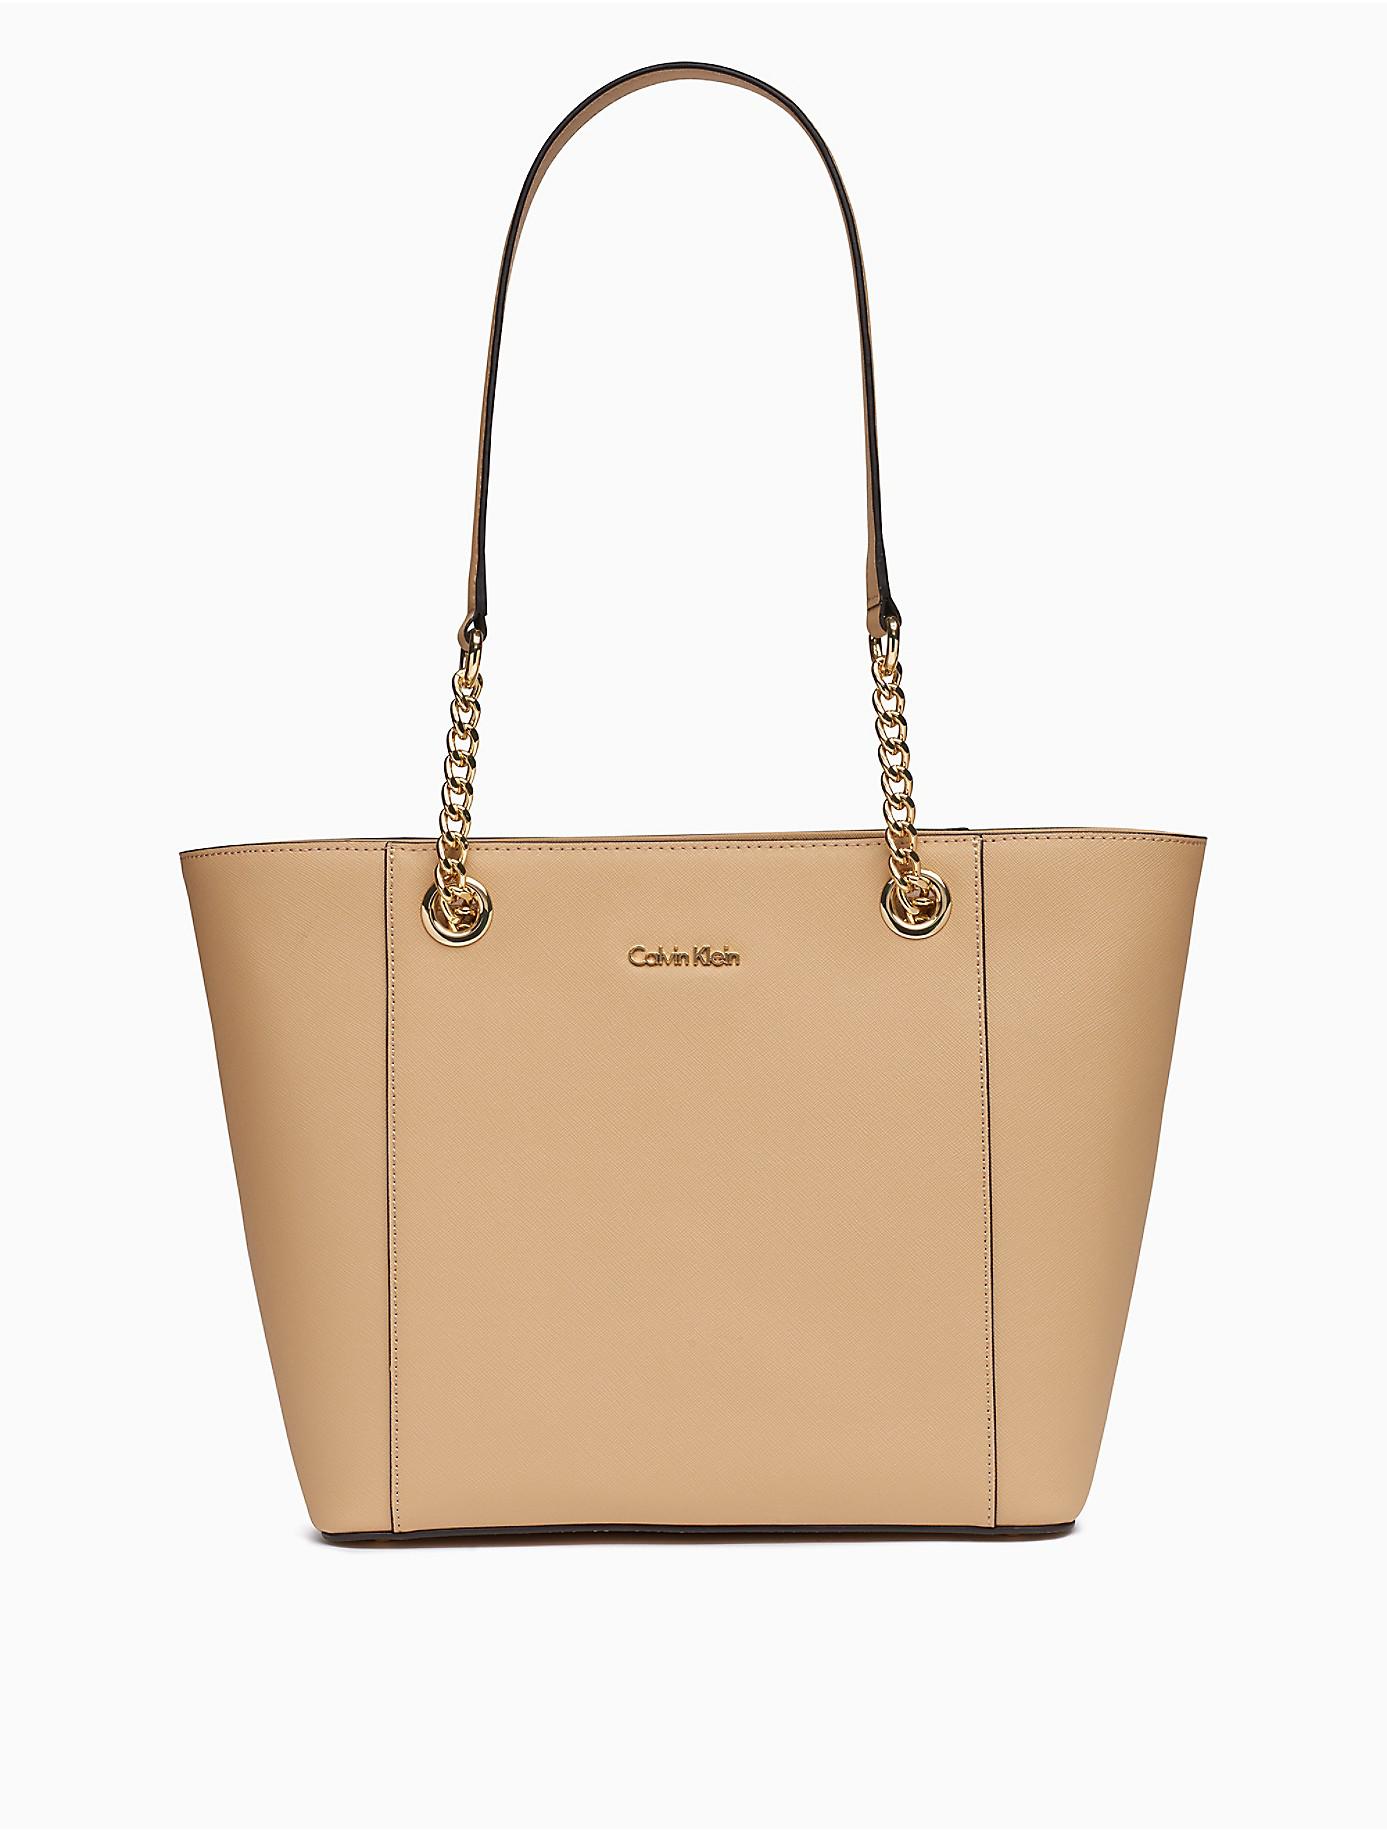 Calvin Klein Saffiano Leather Chainlink Tote Bag in Nude/Gold (Natural) - Lyst